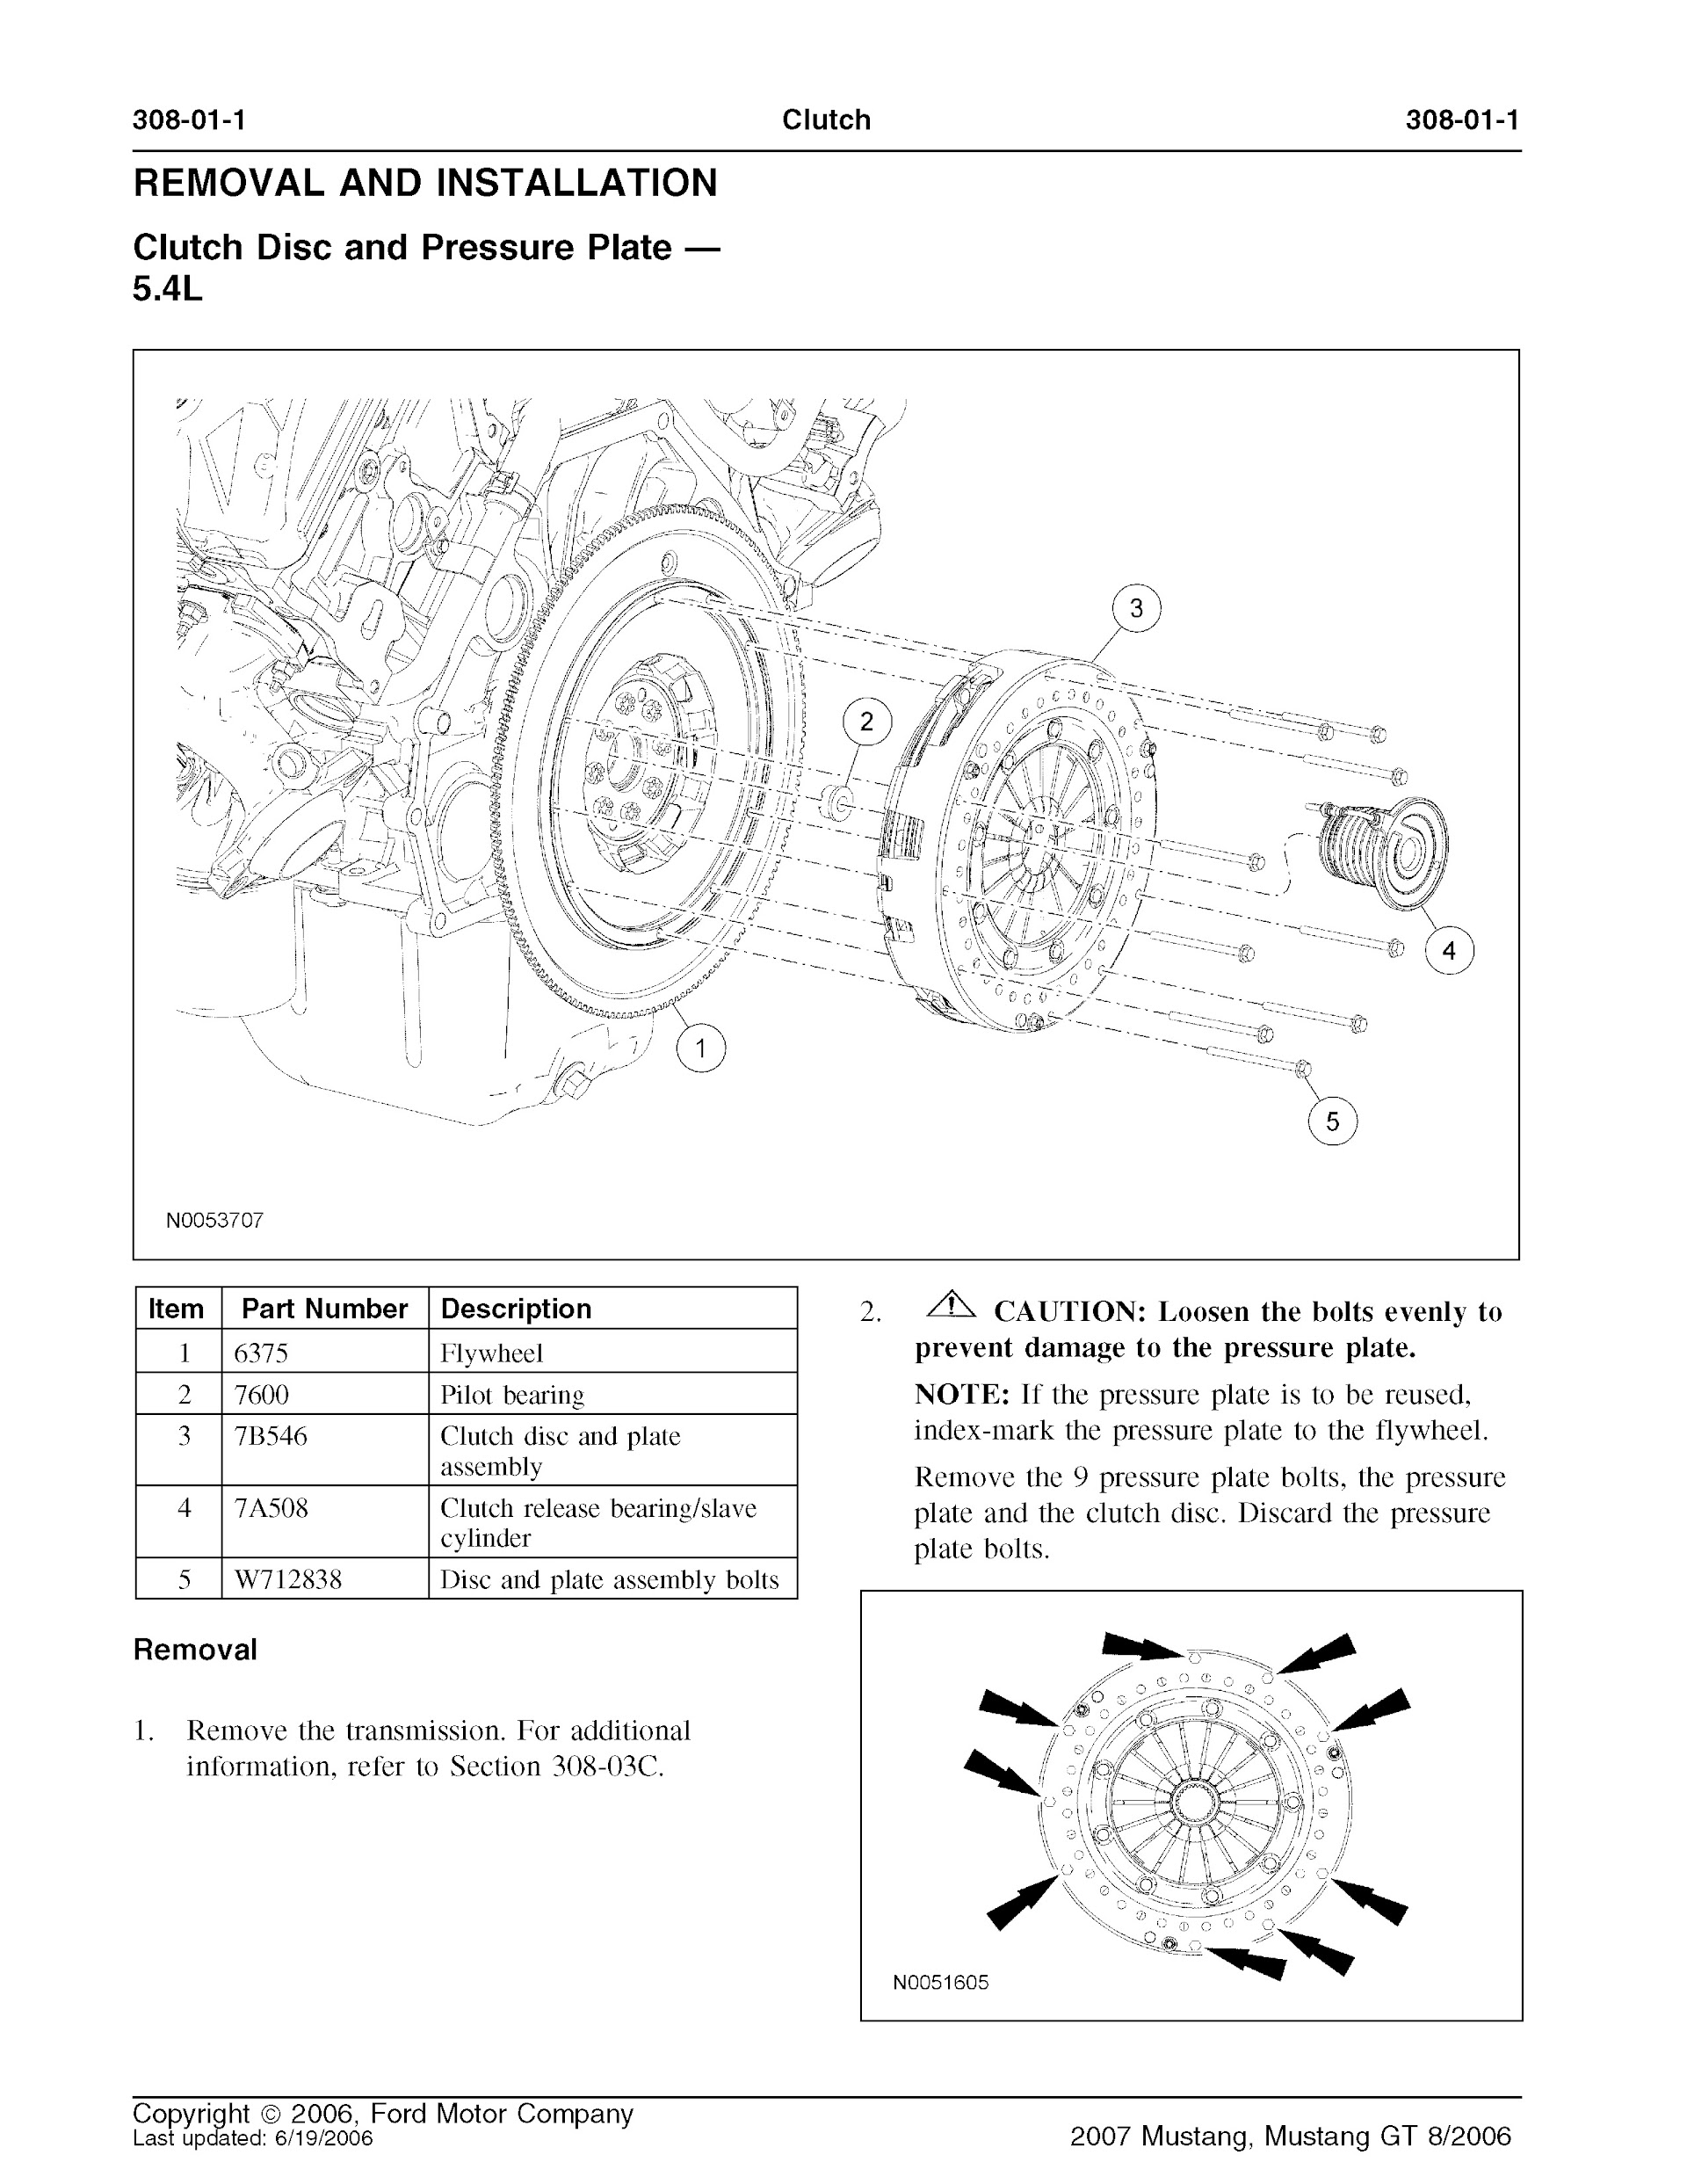 2007 Ford Mustang Repair Manual, Clutch Removal and Installation